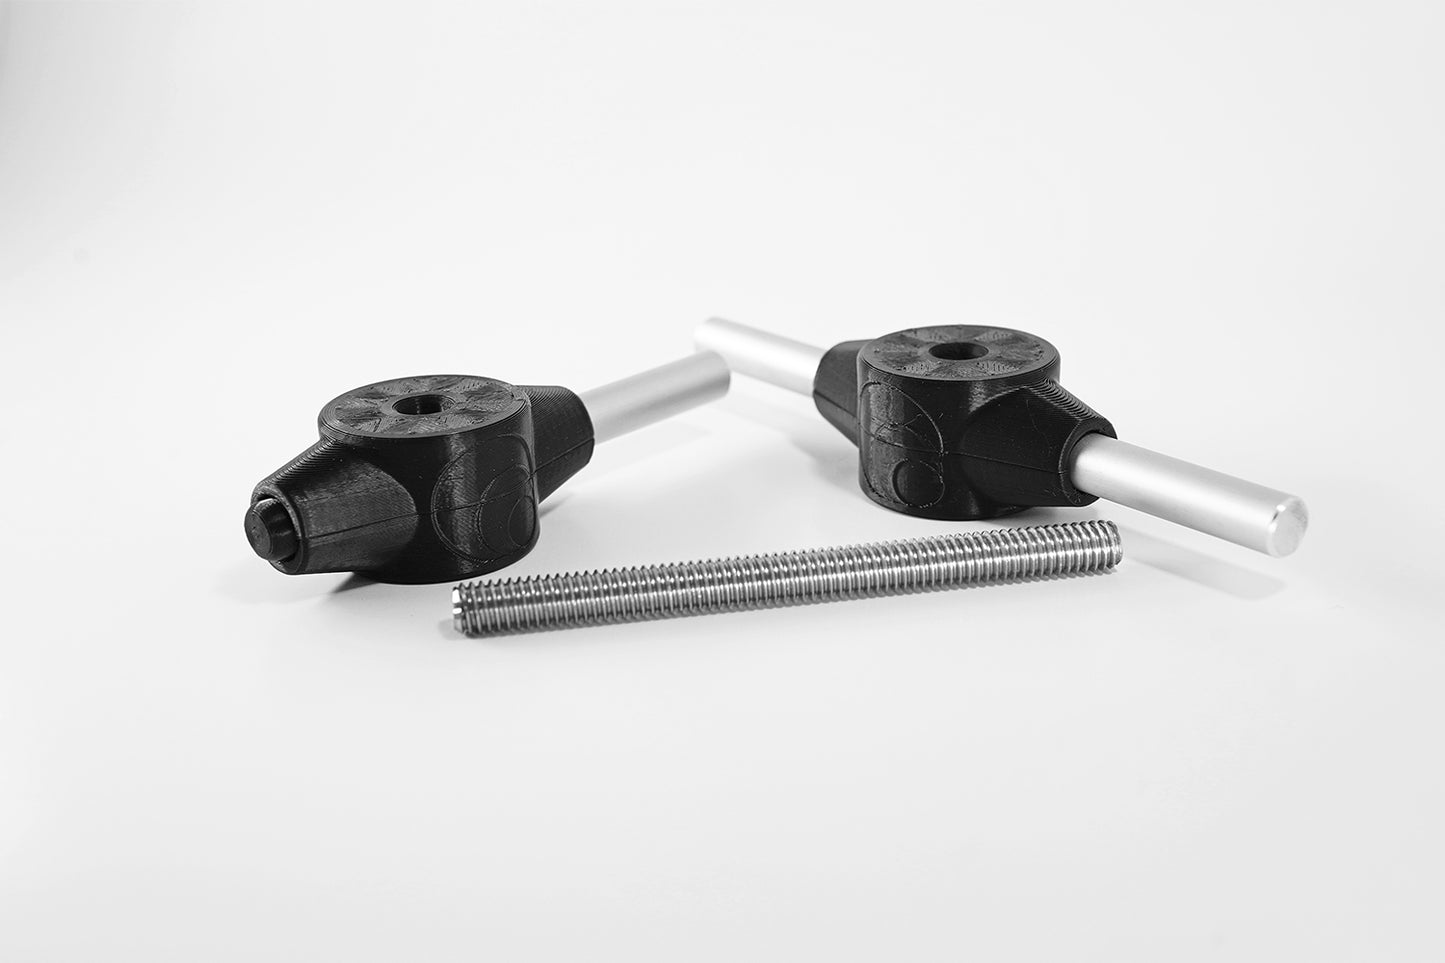 Mountain bike bearing press tool and crank with stainless steel threaded rod.